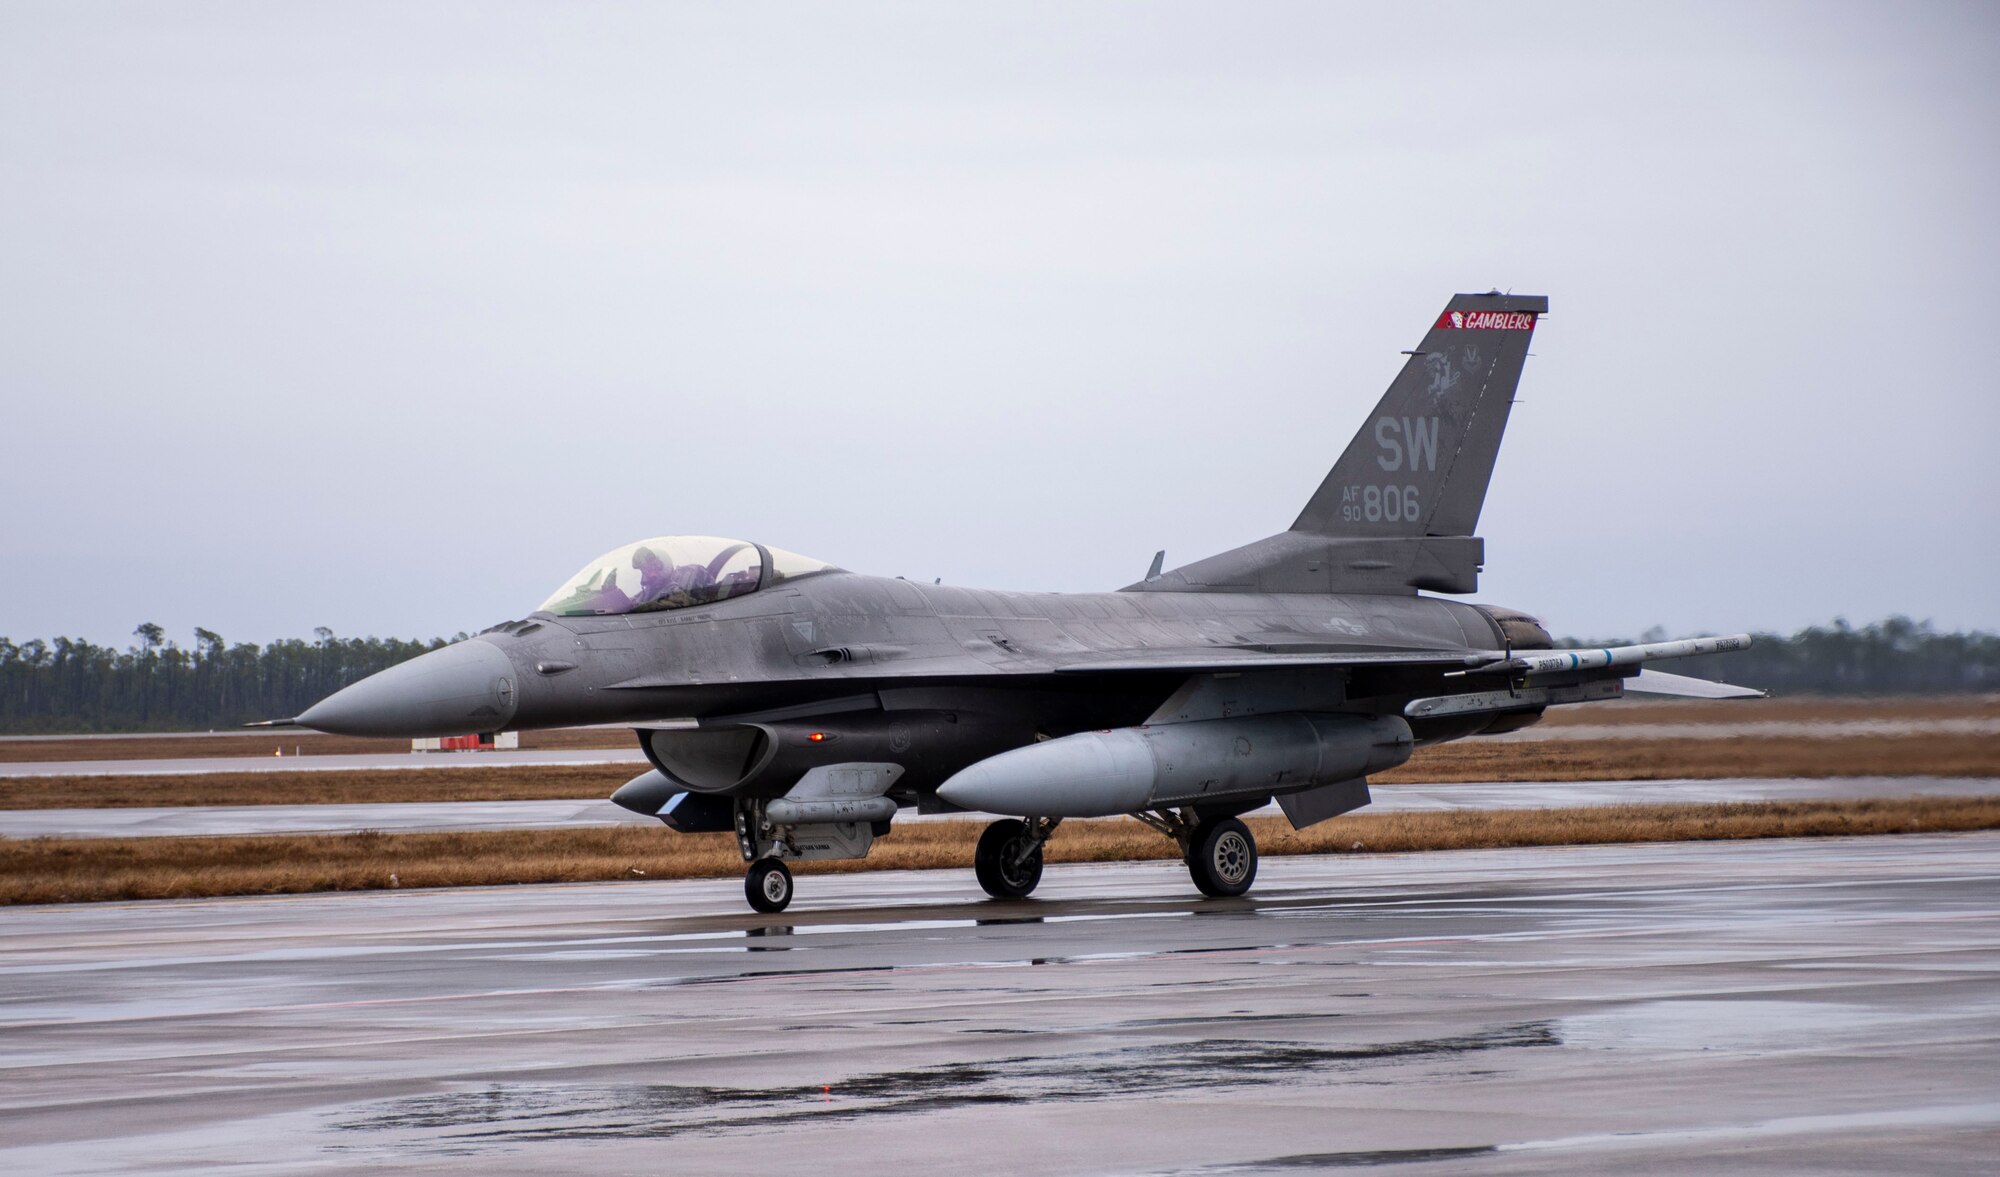 A U.S. Air Force F-16 Fighting Falcon attached to the 77th Fighter Squadron, Shaw Air Force Base, South Carolina prepares to take off at Tyndall Air Force Base, Florida to participate in the 53rd Weapons Evaluation Group’s Weapons System Evaluation Program East 22.04, Jan. 25, 2022. WSEP tests and validates the performance of crews, pilots, and their technology to enhance readiness for real-world operations. (U.S. Air Force photo by 1st Lt Lindsey Heflin)